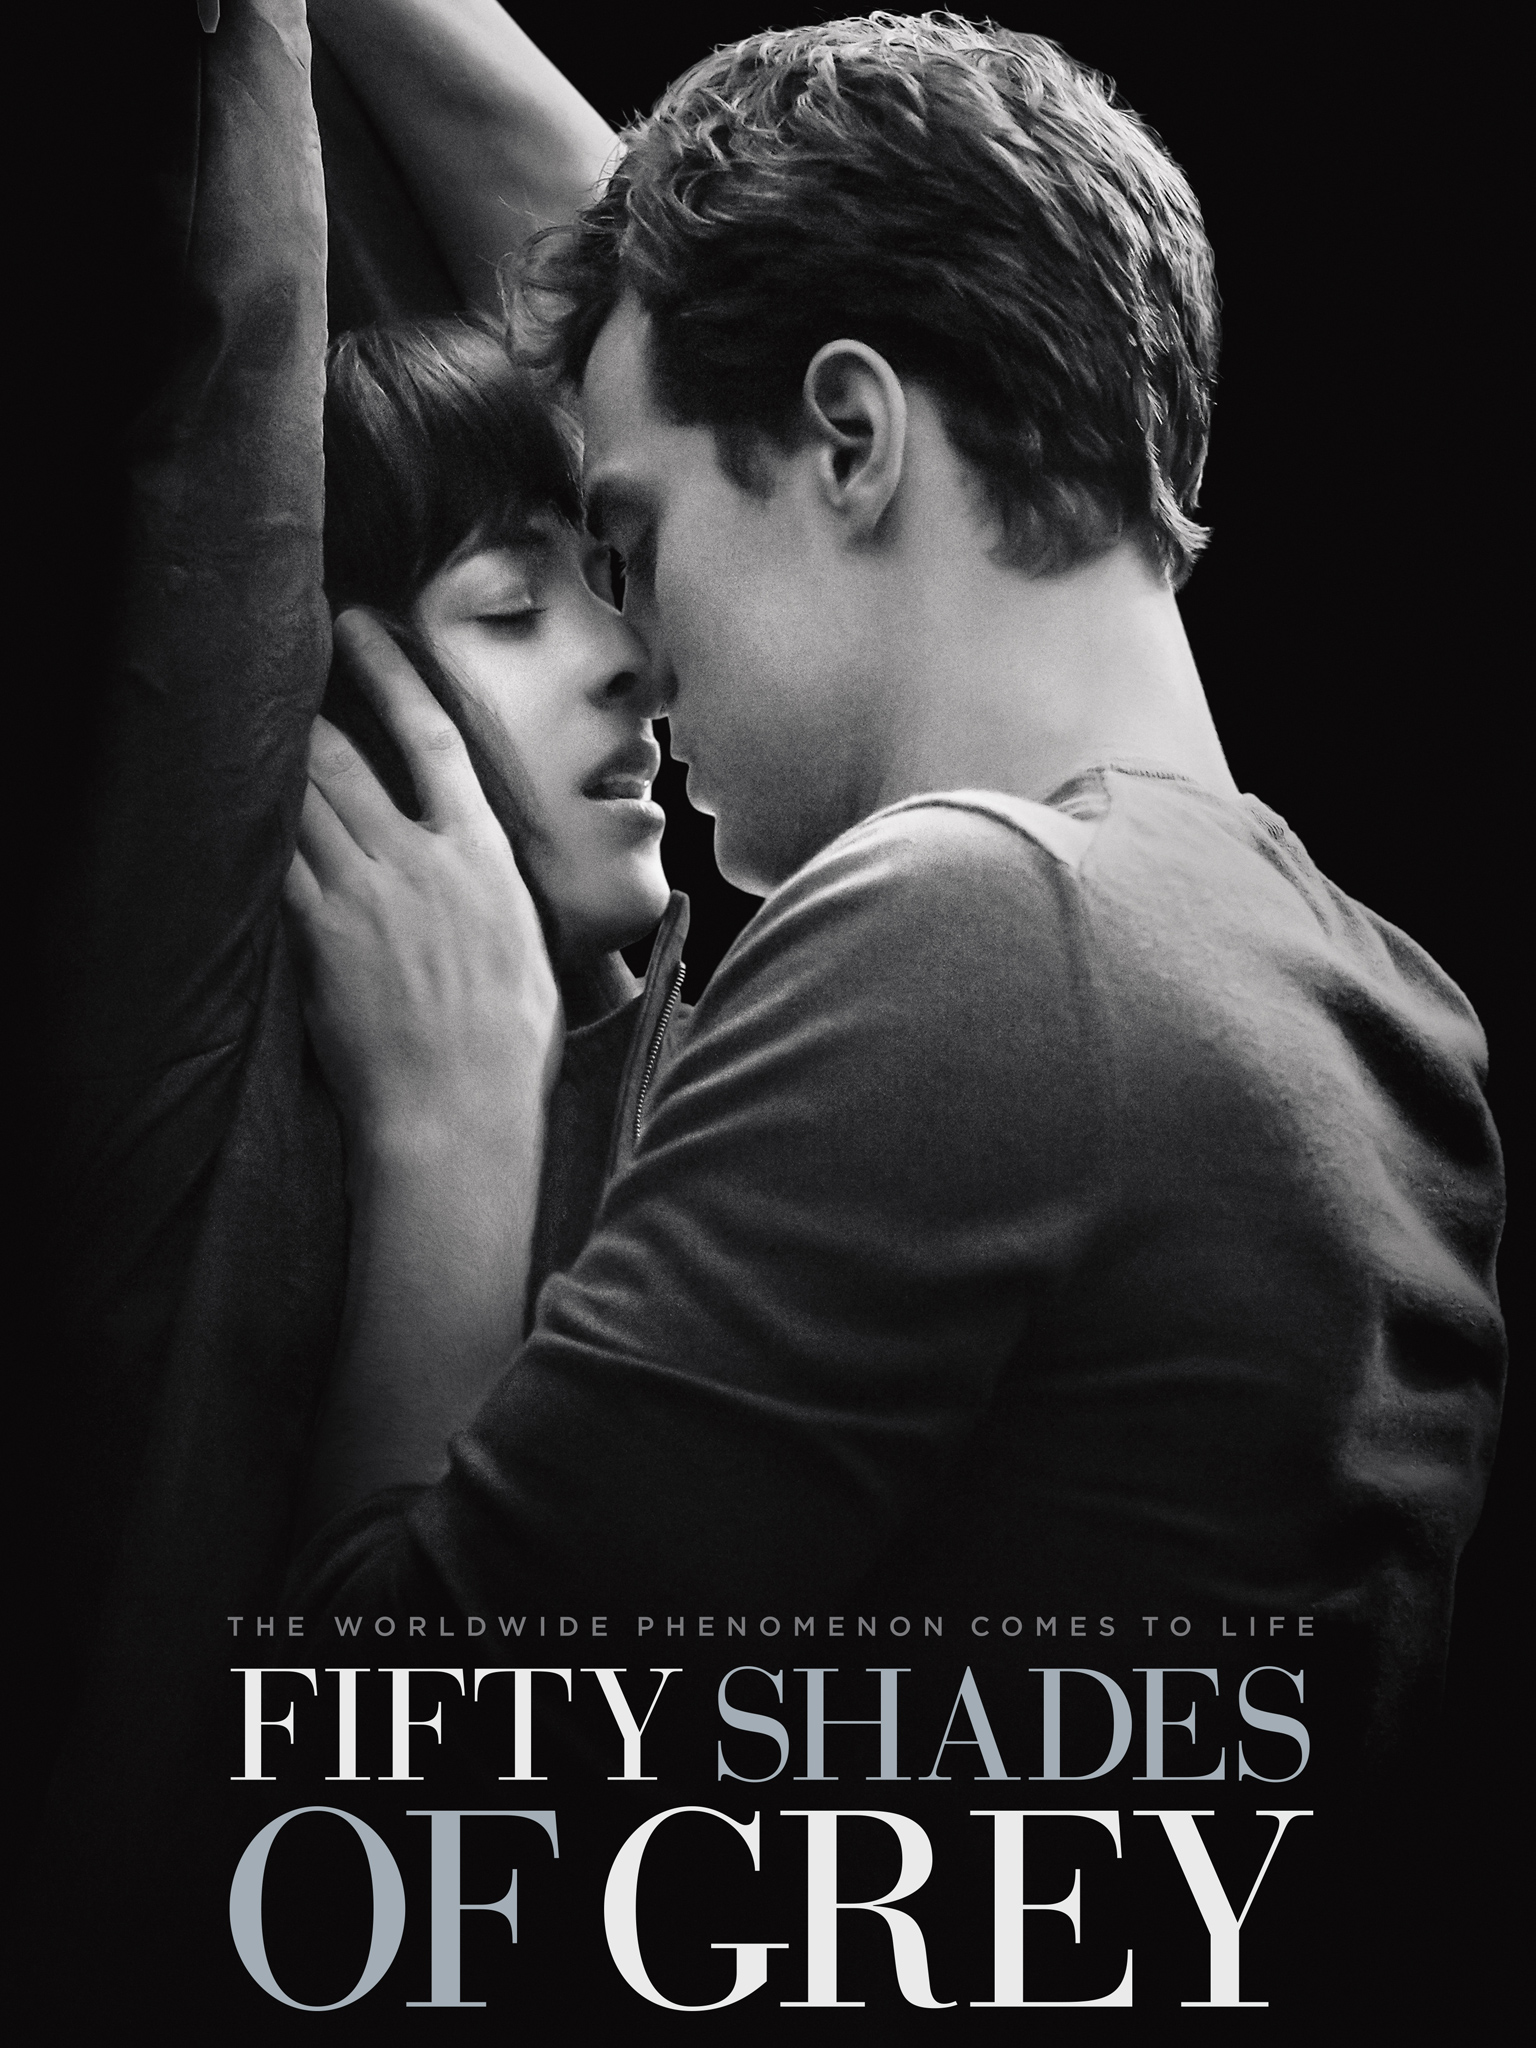 barb newcomer recommends Where To Stream Fifty Shades